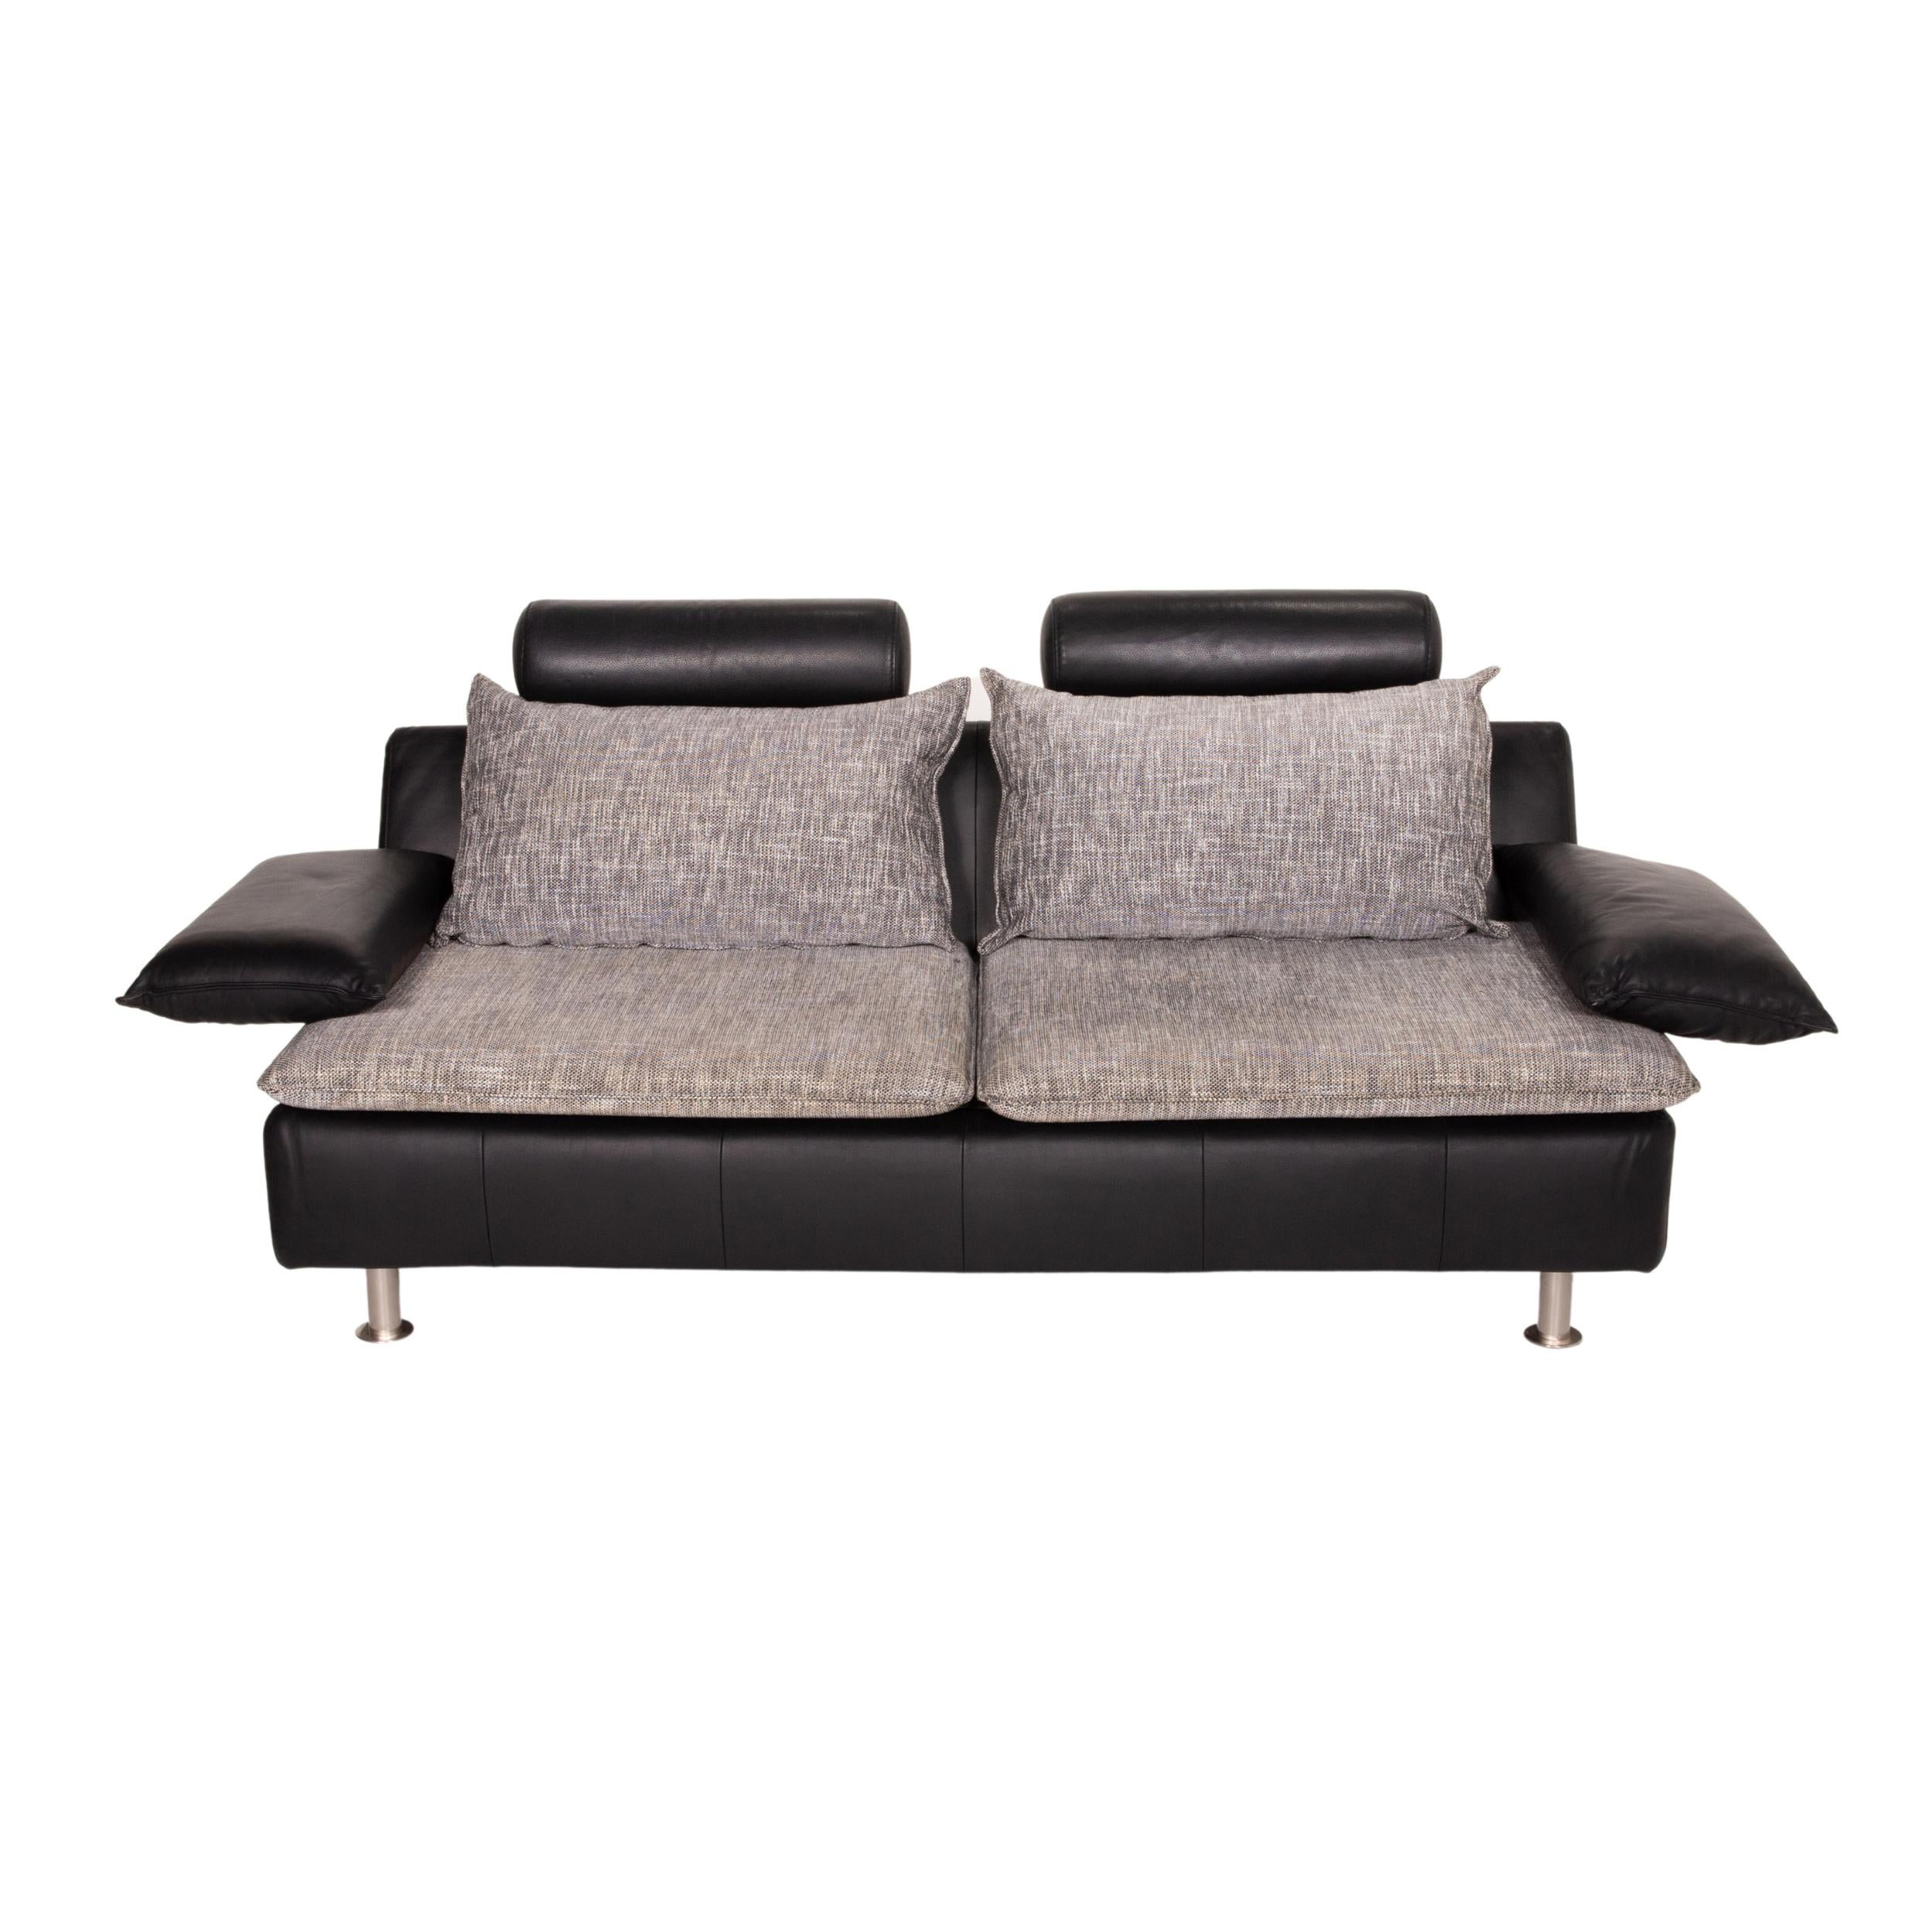 Möller Design Tayo Leather Sofa Black Two-Seat Couch 1